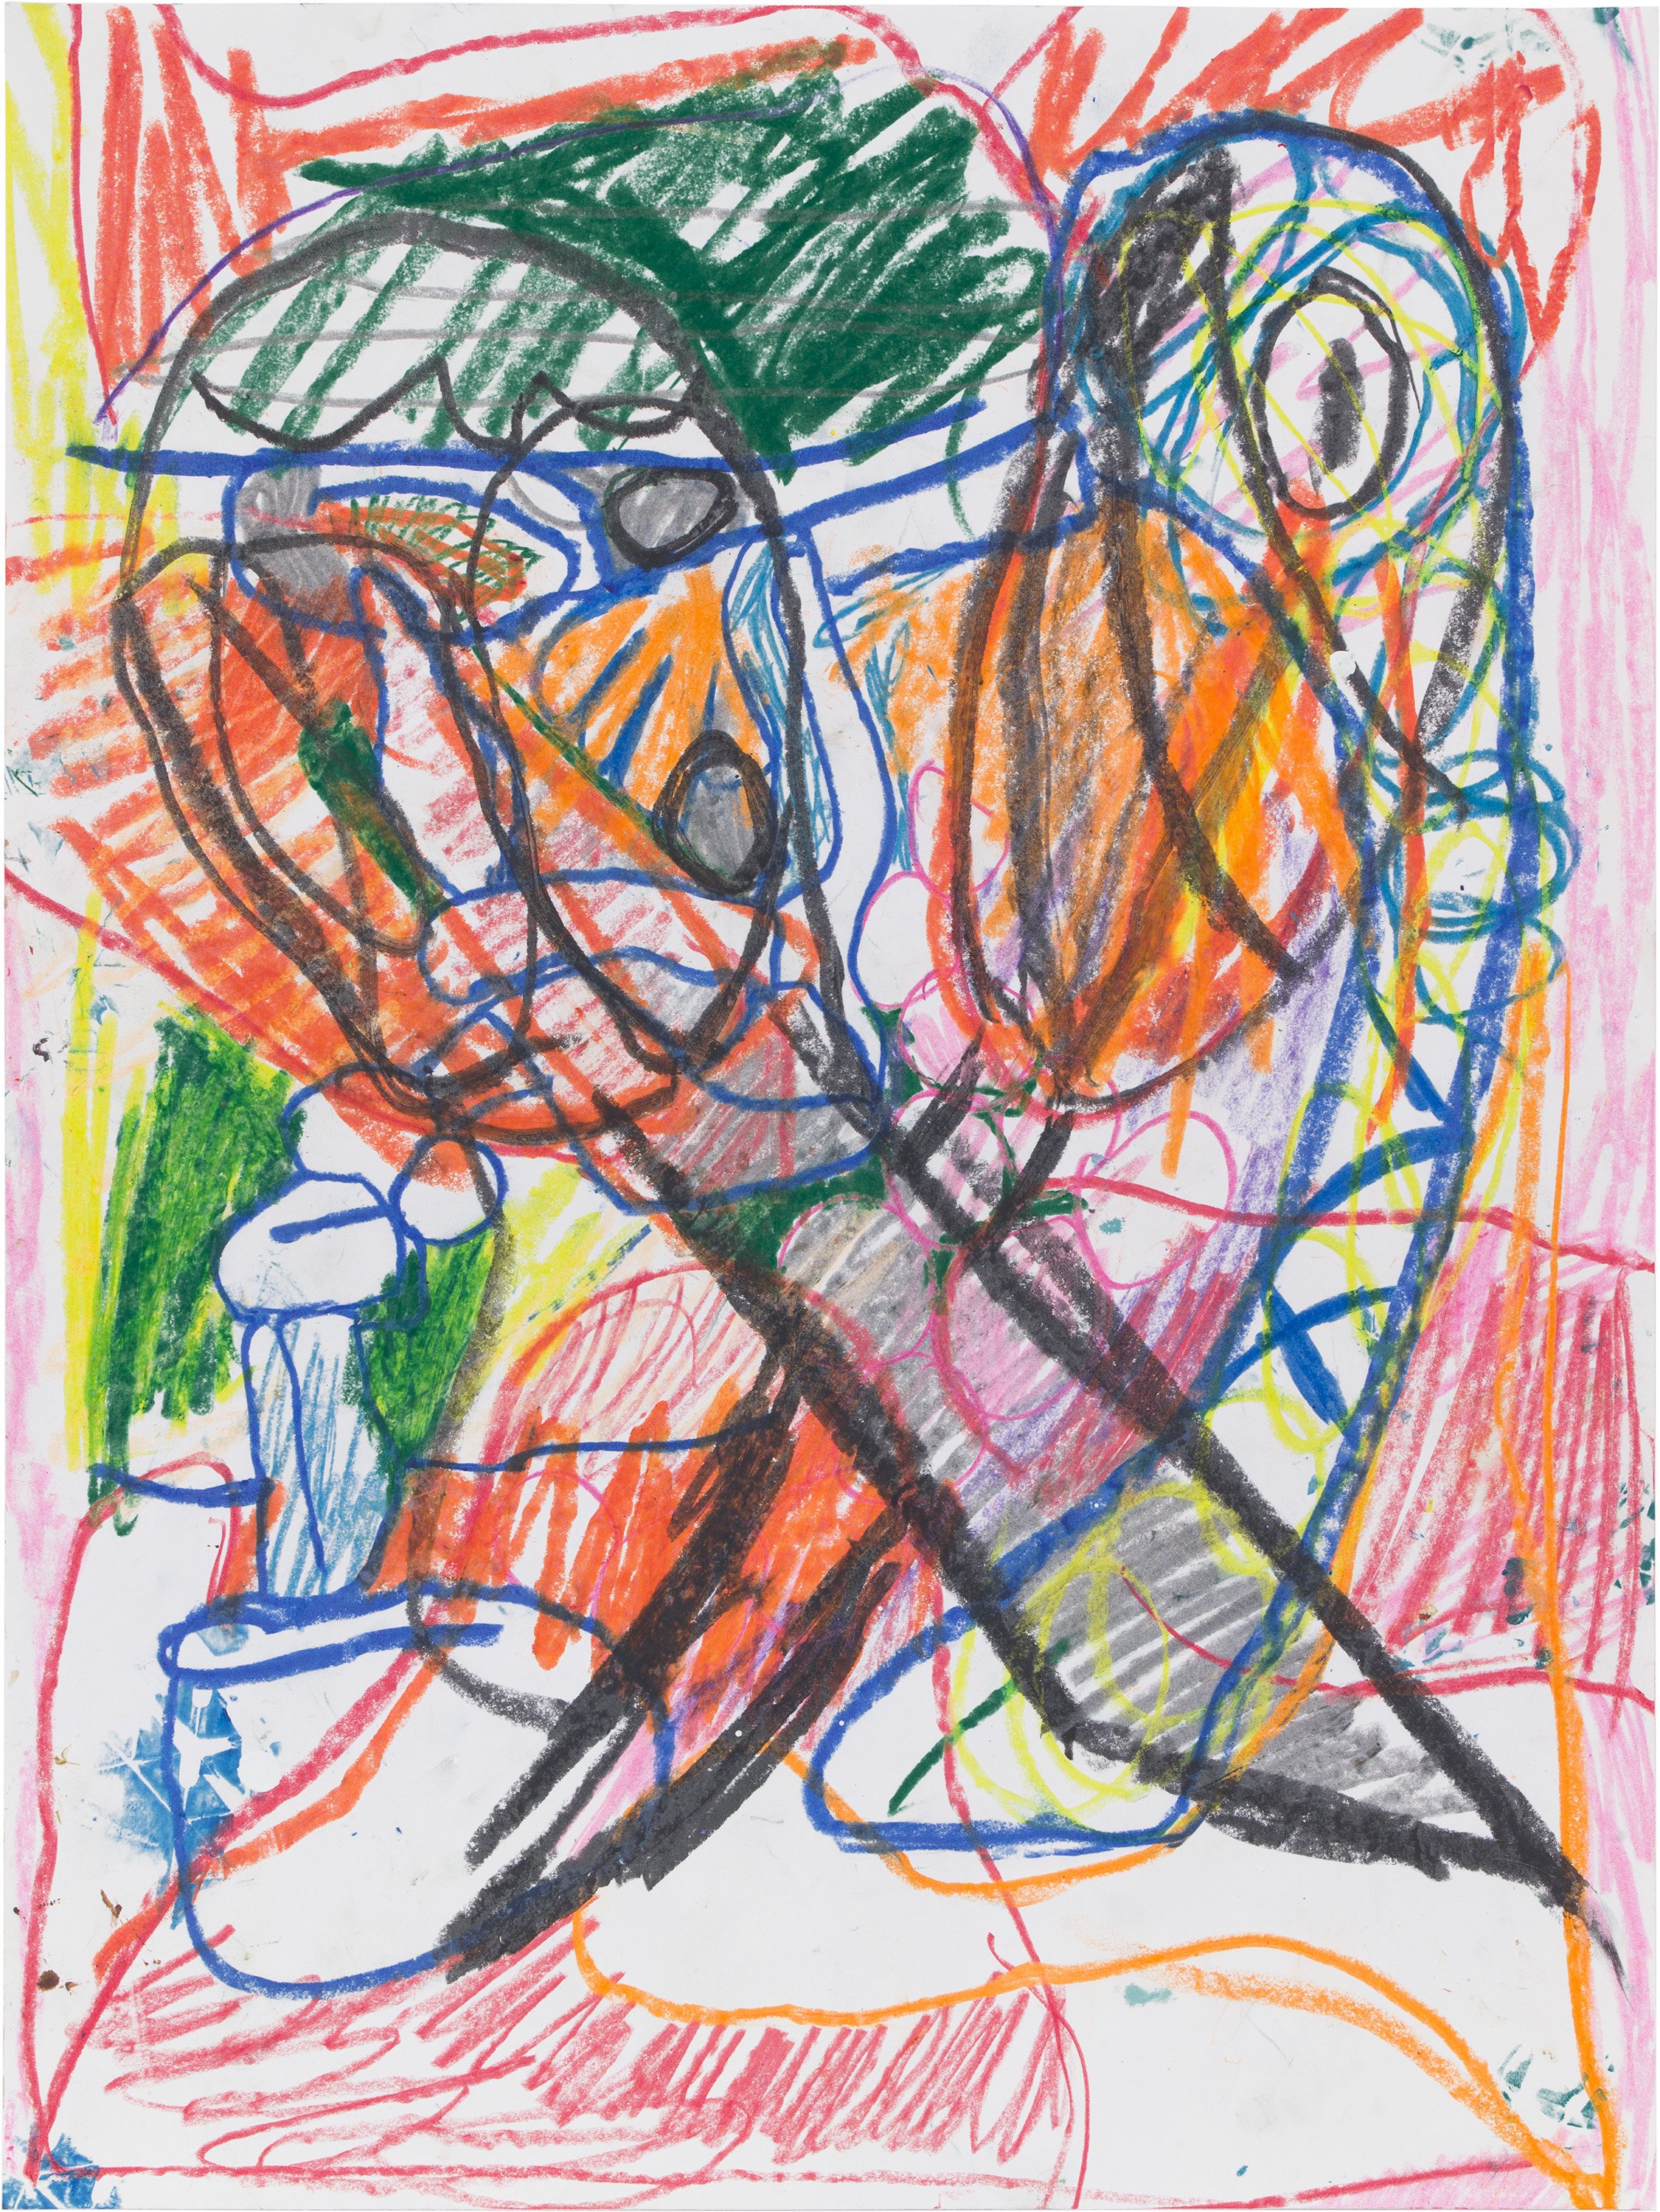  Drew Beattie and Ben Shepard   DBBS-DRW-2018-044   2018  acrylic and crayon on paper 24 x 18 inches 